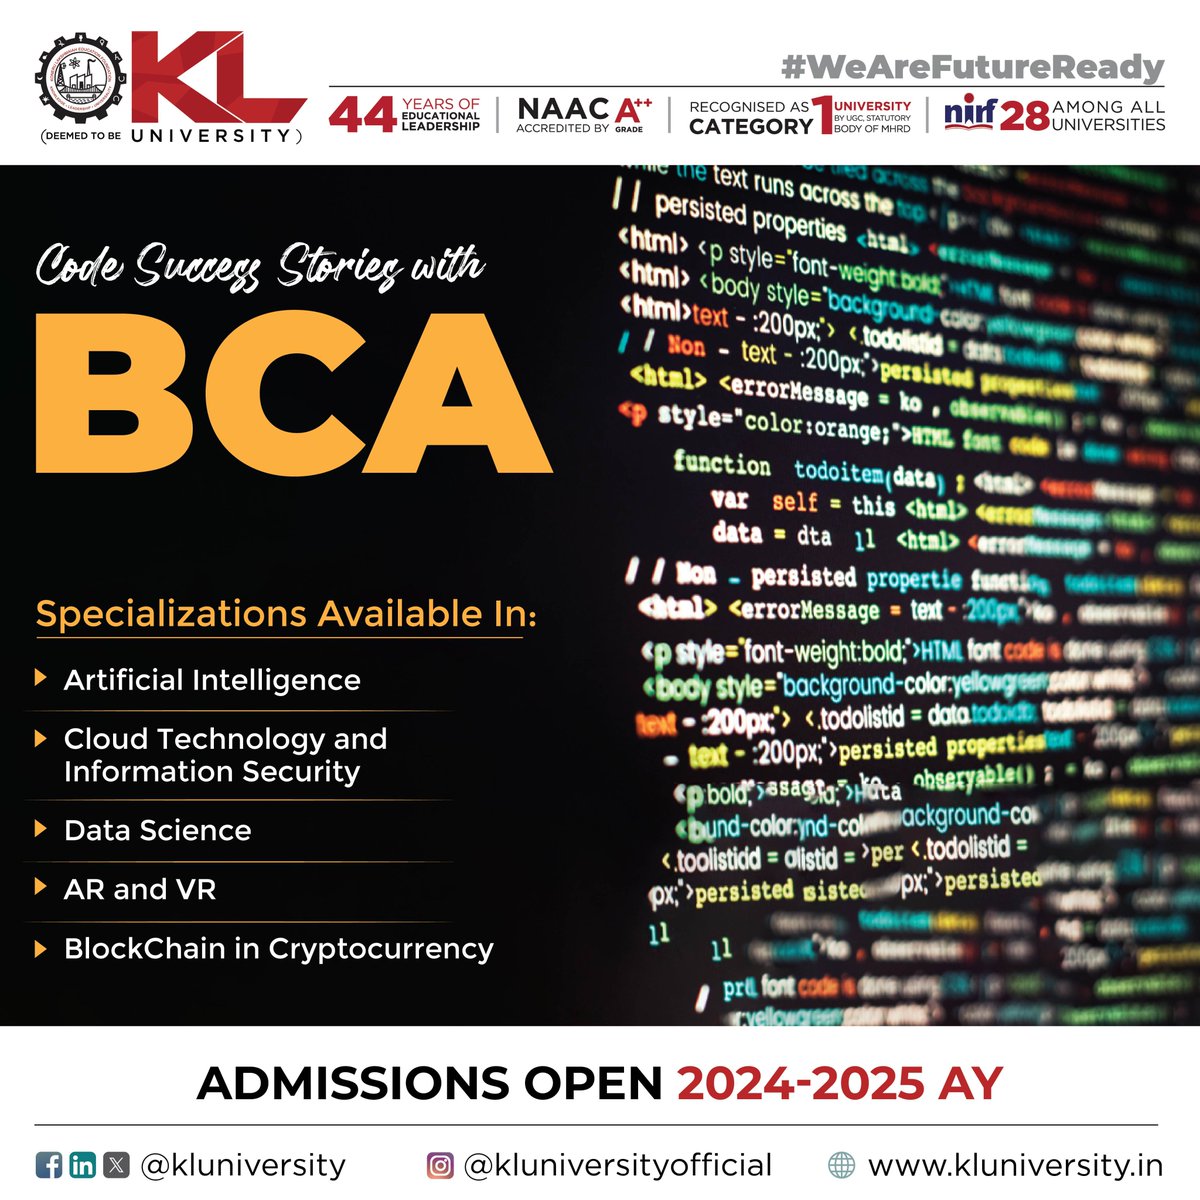 Explore your potential with our BCA program, offering specializations in AI, Cloud Tech, Data Science, AR/VR, and Blockchain for Cryptocurrency. 

Apply Now: kluniversity.in/admissions-202…

#KLuniversity #KLU #AdmissionsAreOpen2024 #Admissions2024_25 #WeAreFutureReady #Placements #BCA